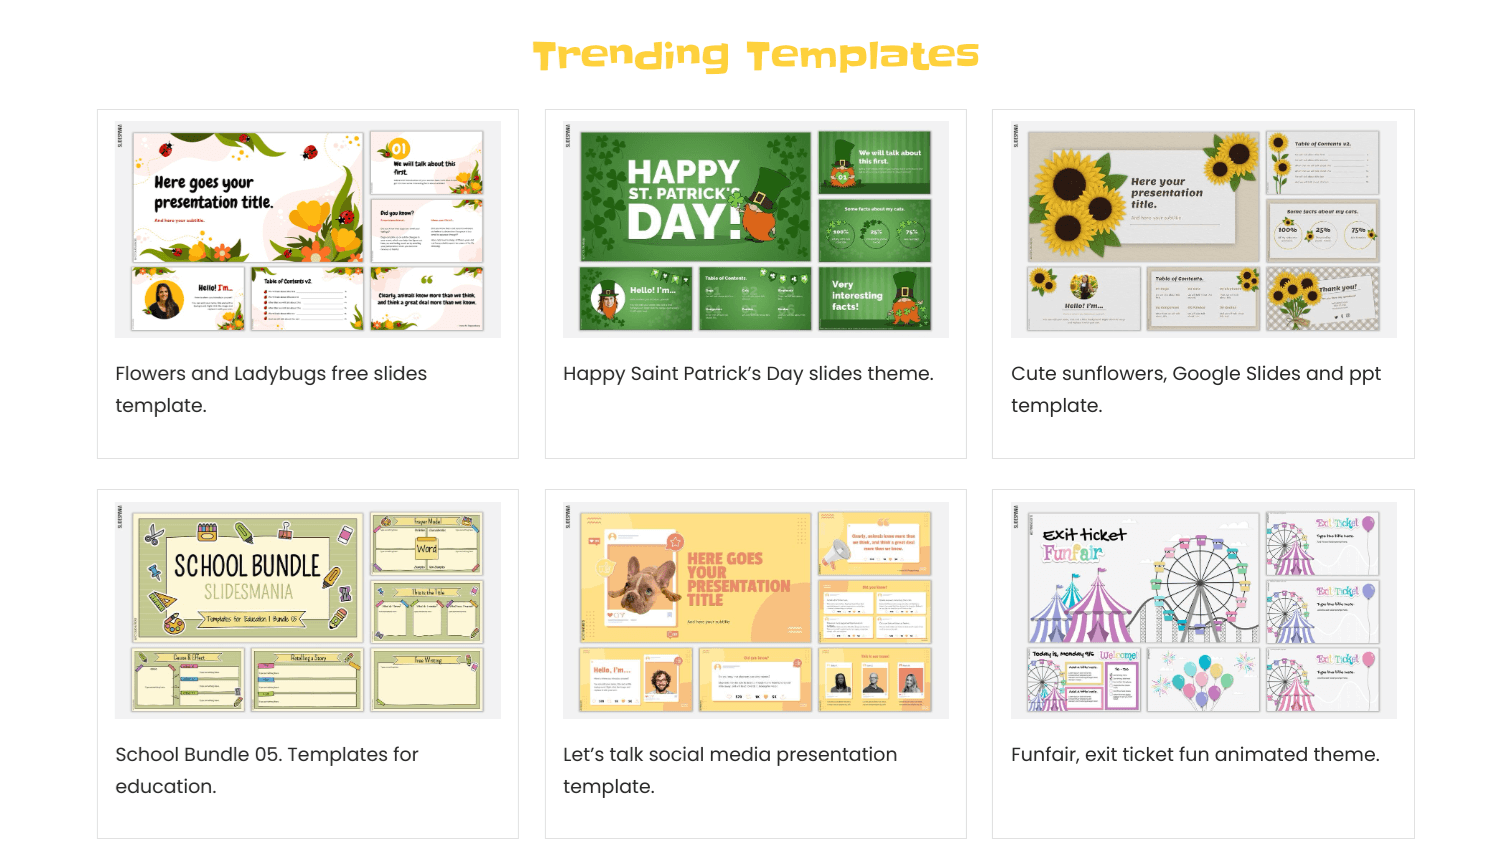 Some of the available Jamboard templates in SlideMania